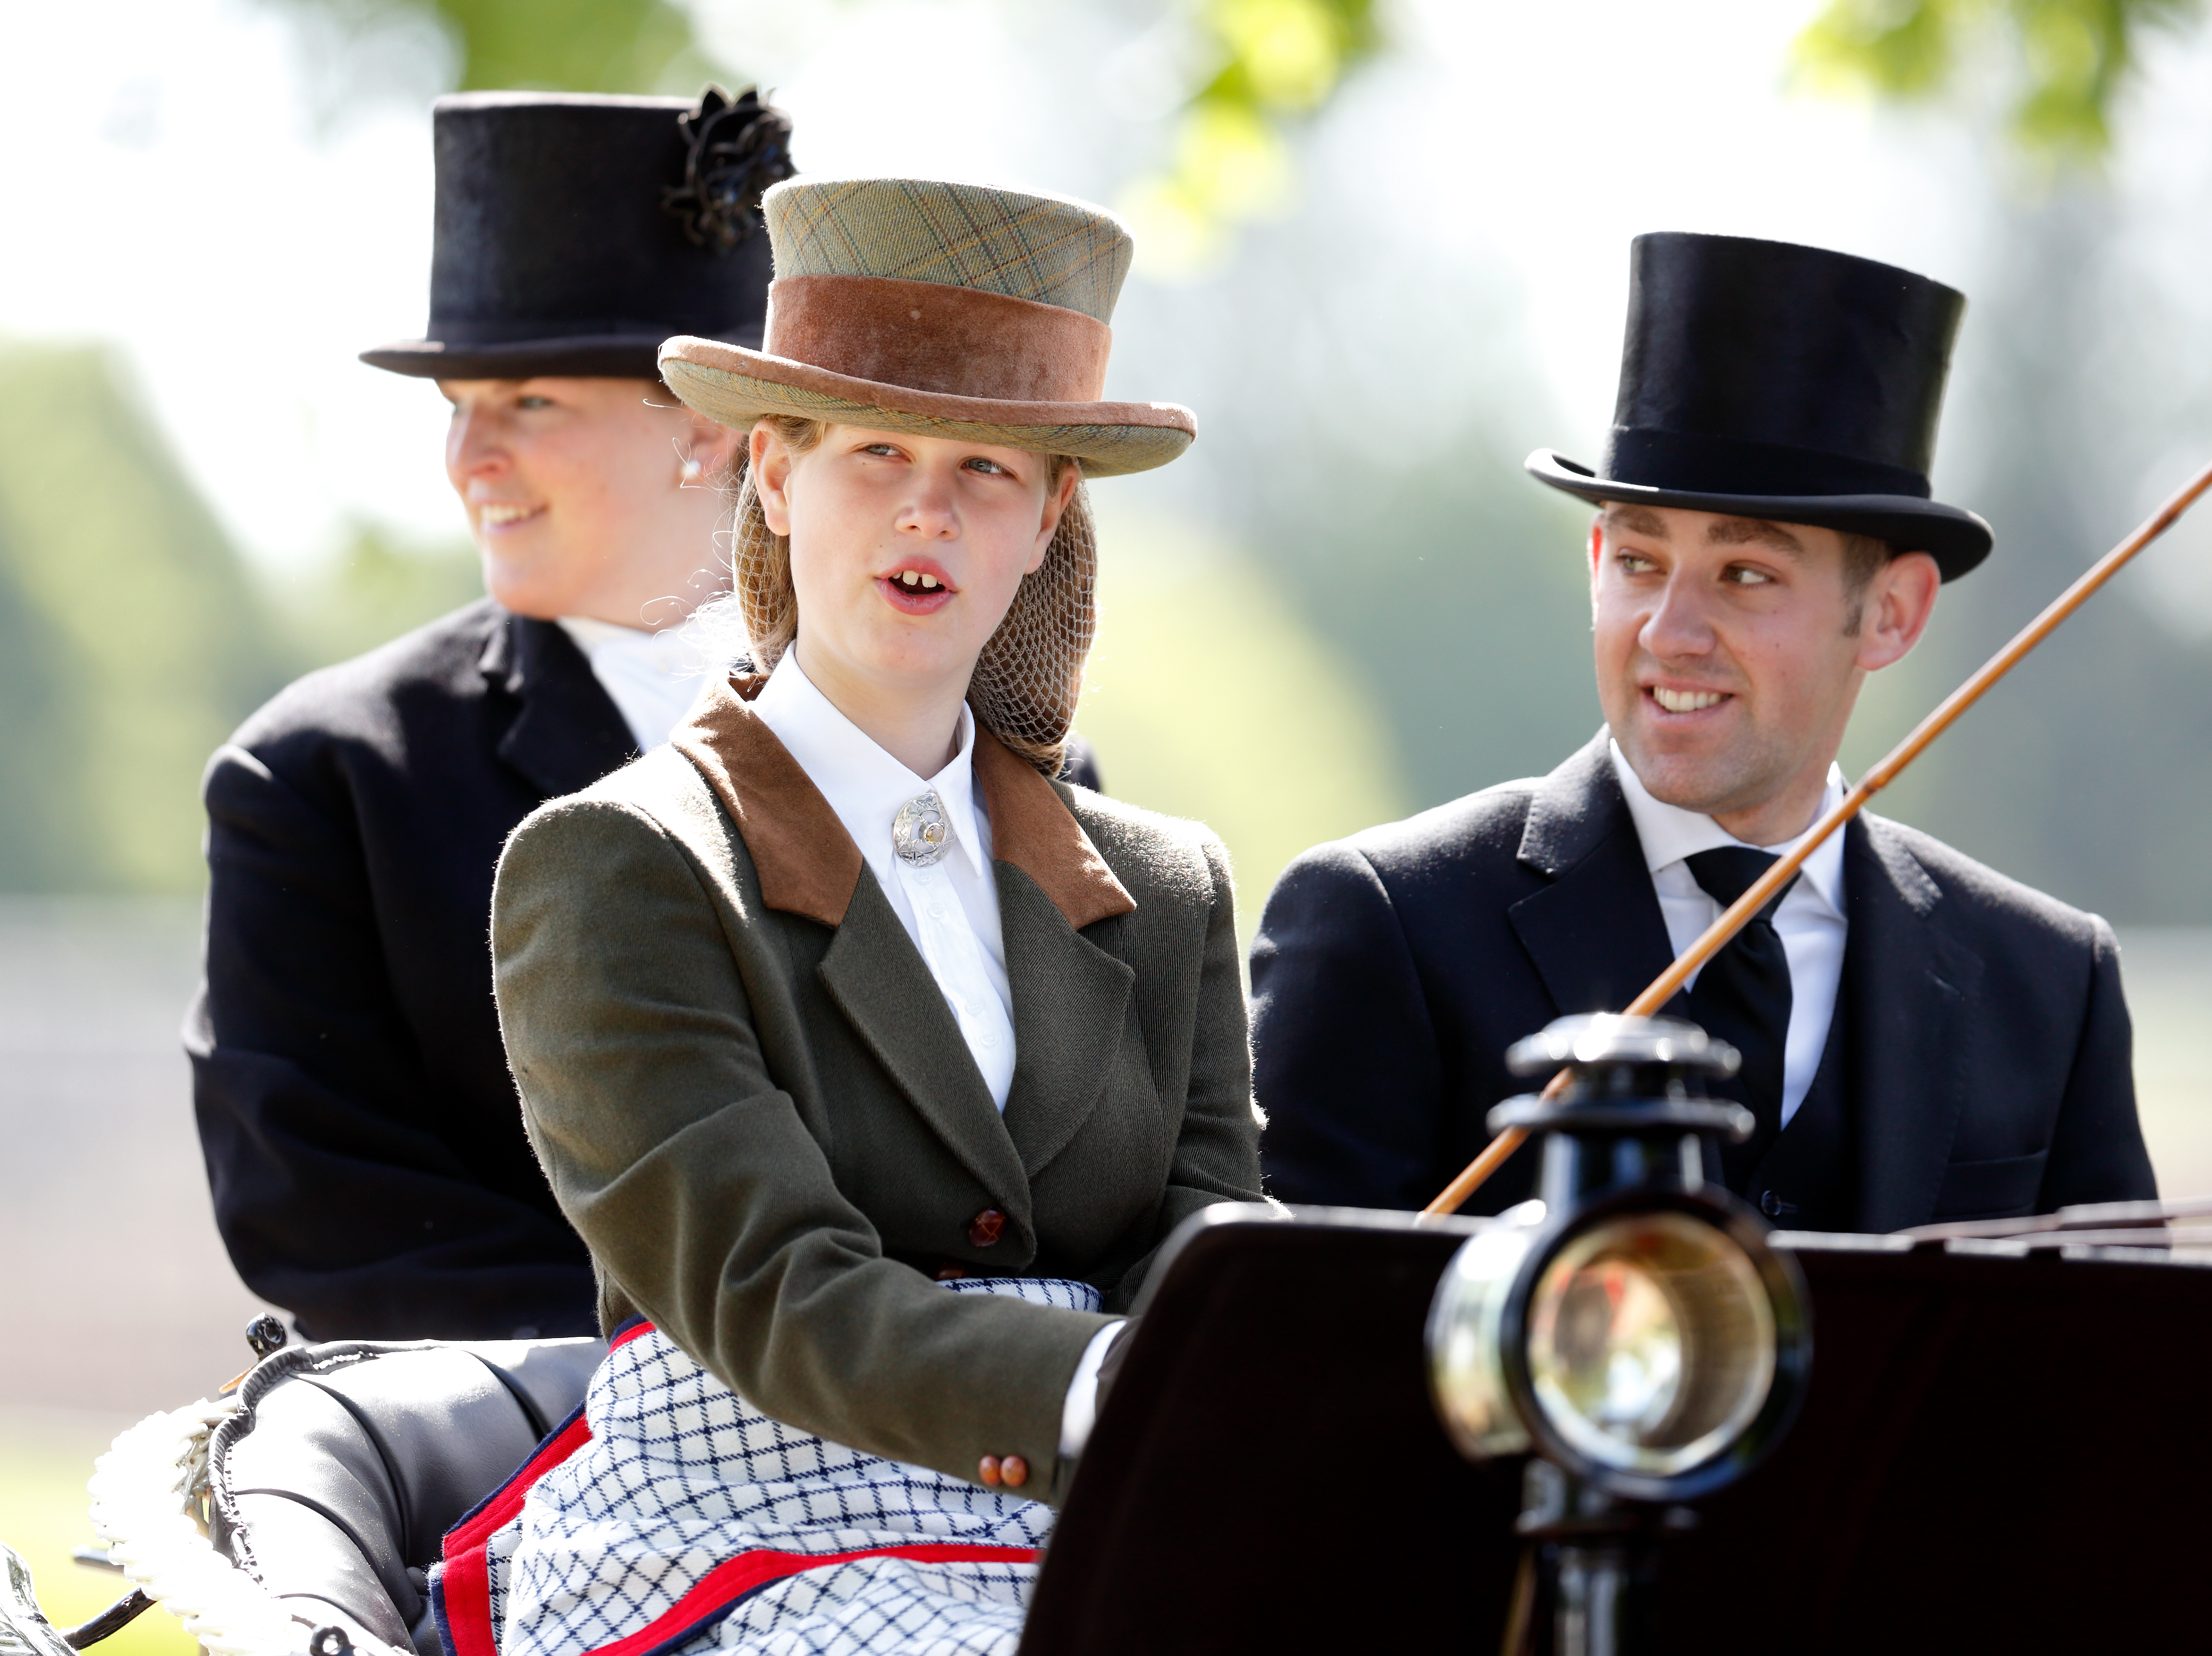 Lady Louise Windsor seen carriage driving as she takes part in The Champagne Laurent-Perrier Meet of the British Driving Society on day 5 of the Royal Windsor Horse Show in Home Park on May 14, 2017 in Windsor, England. (Max Mumby/Indigo—Getty Images)